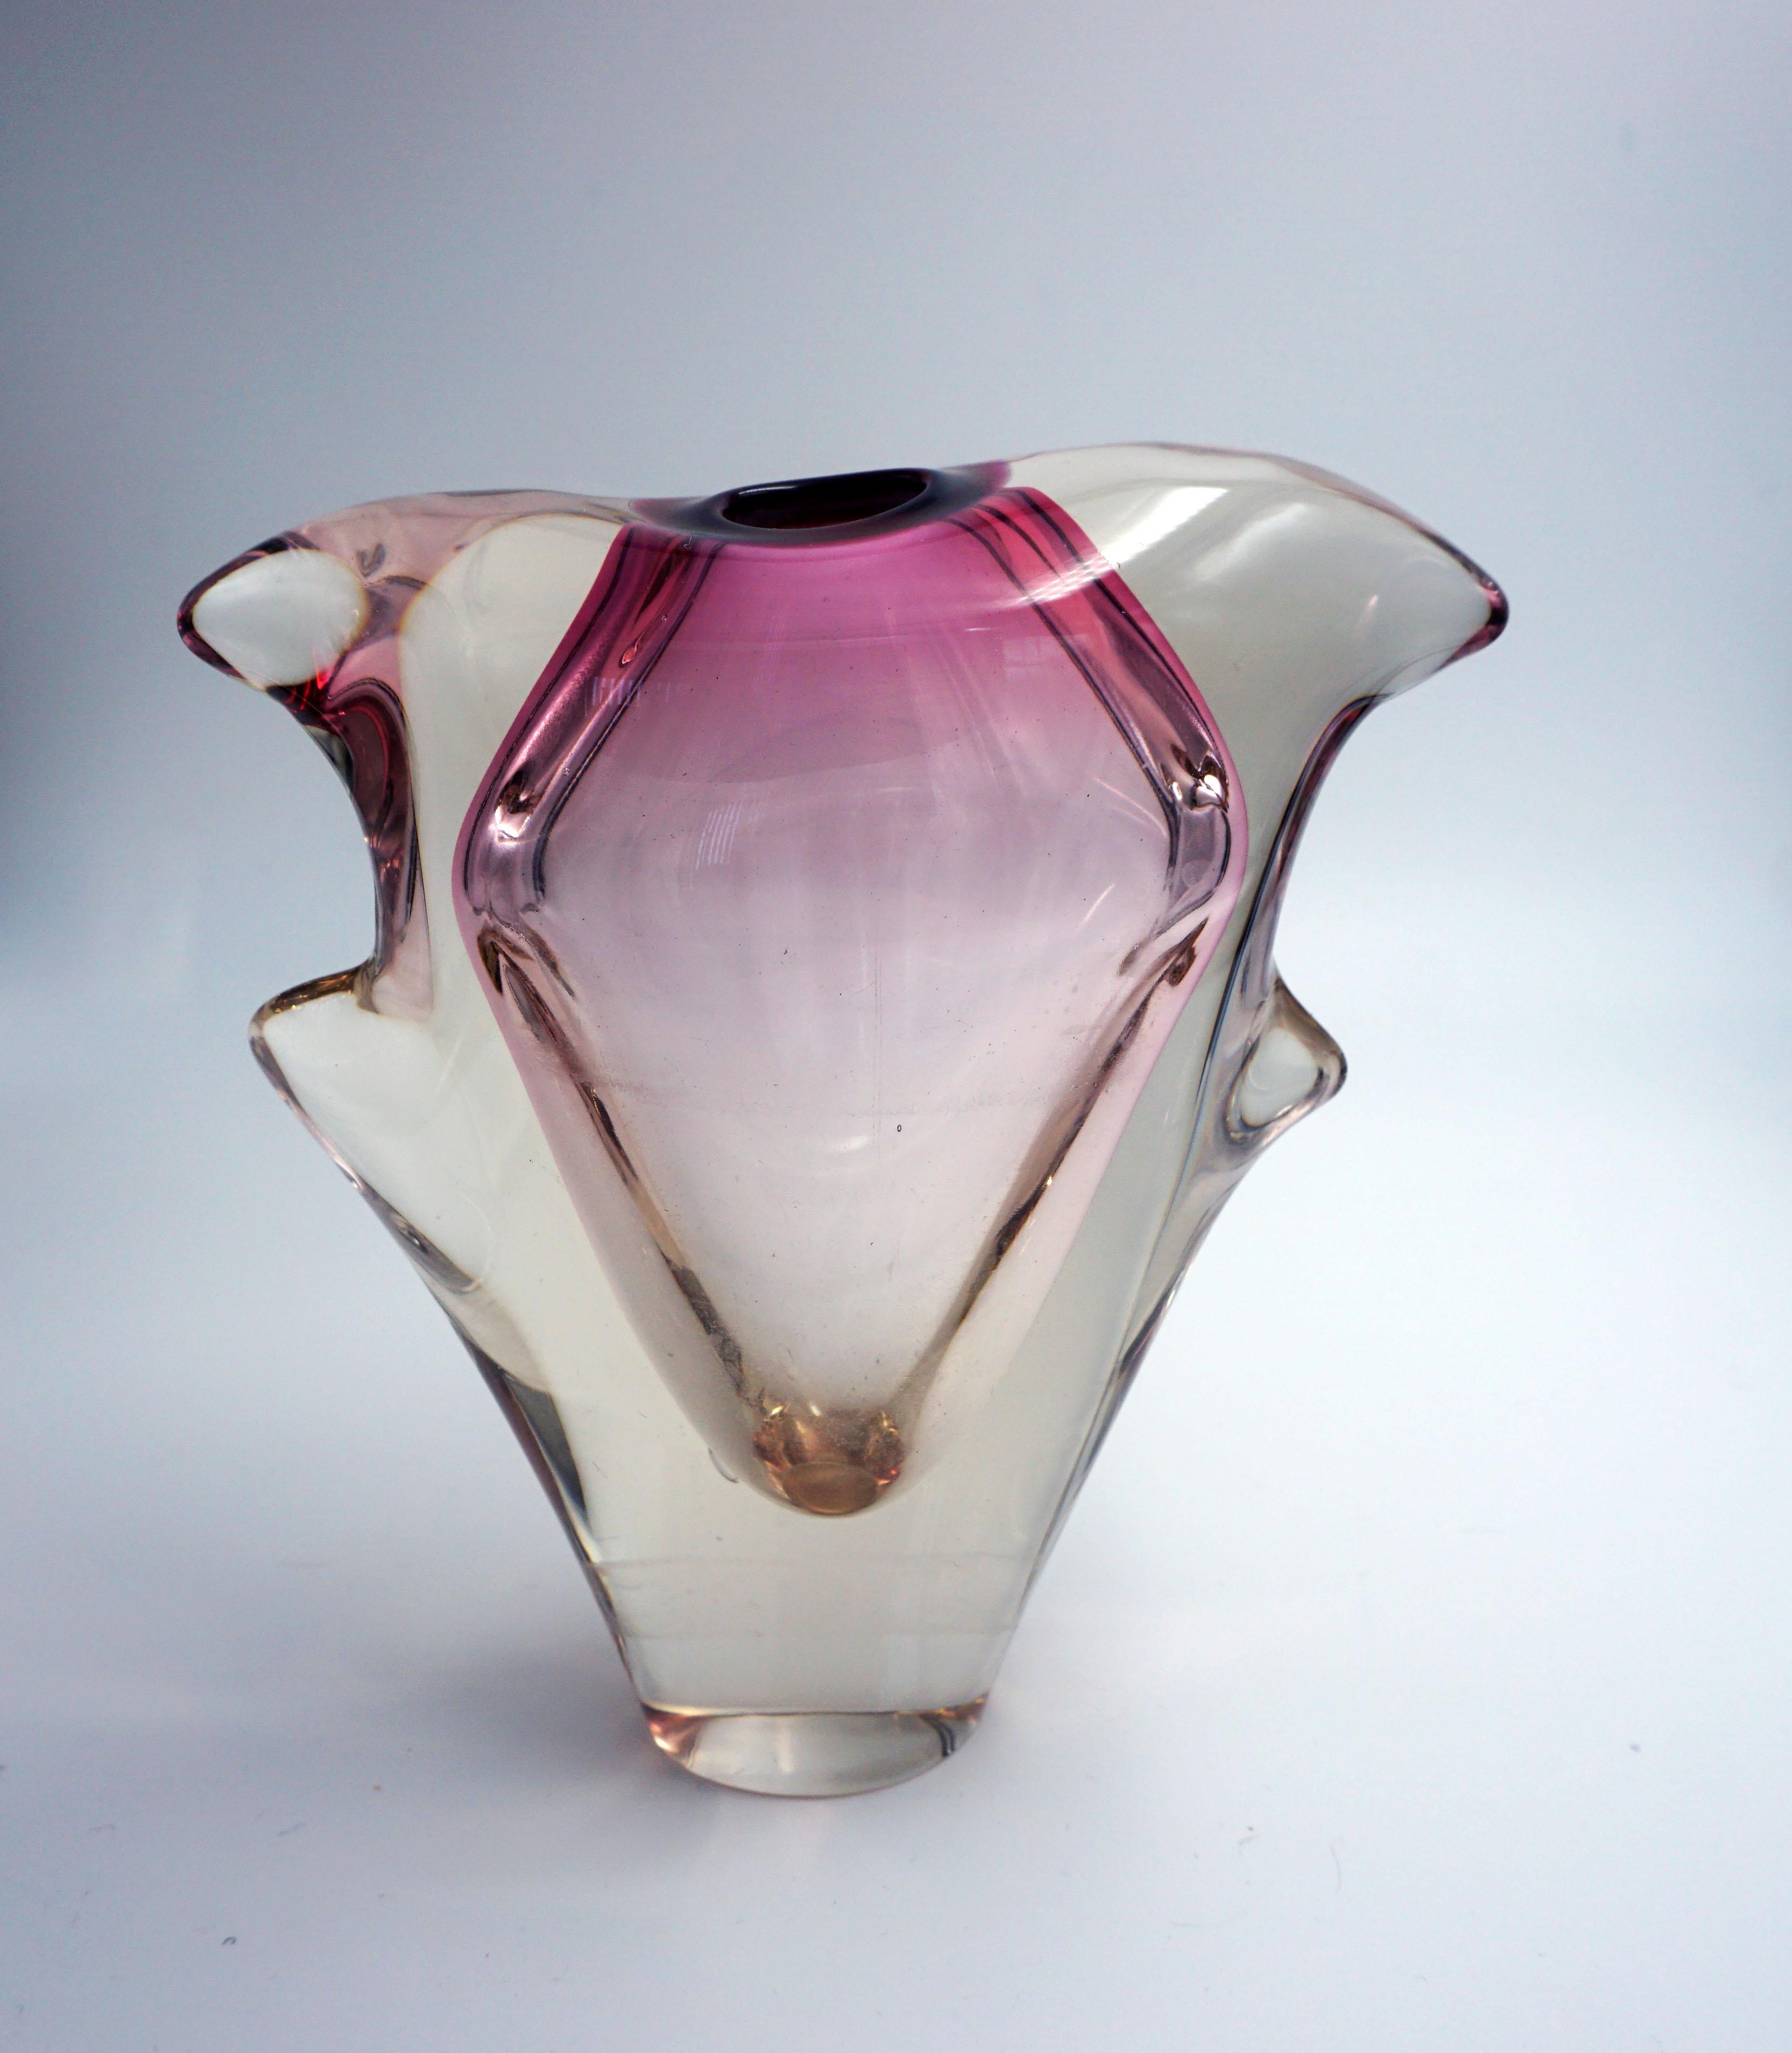 Beautiful vintage Murano hand blown and pulled magenta to clear Italian glass vase. Hand blown pulled details give this unique piece four corners with a magenta Ombre effect. Measures 5 1/2